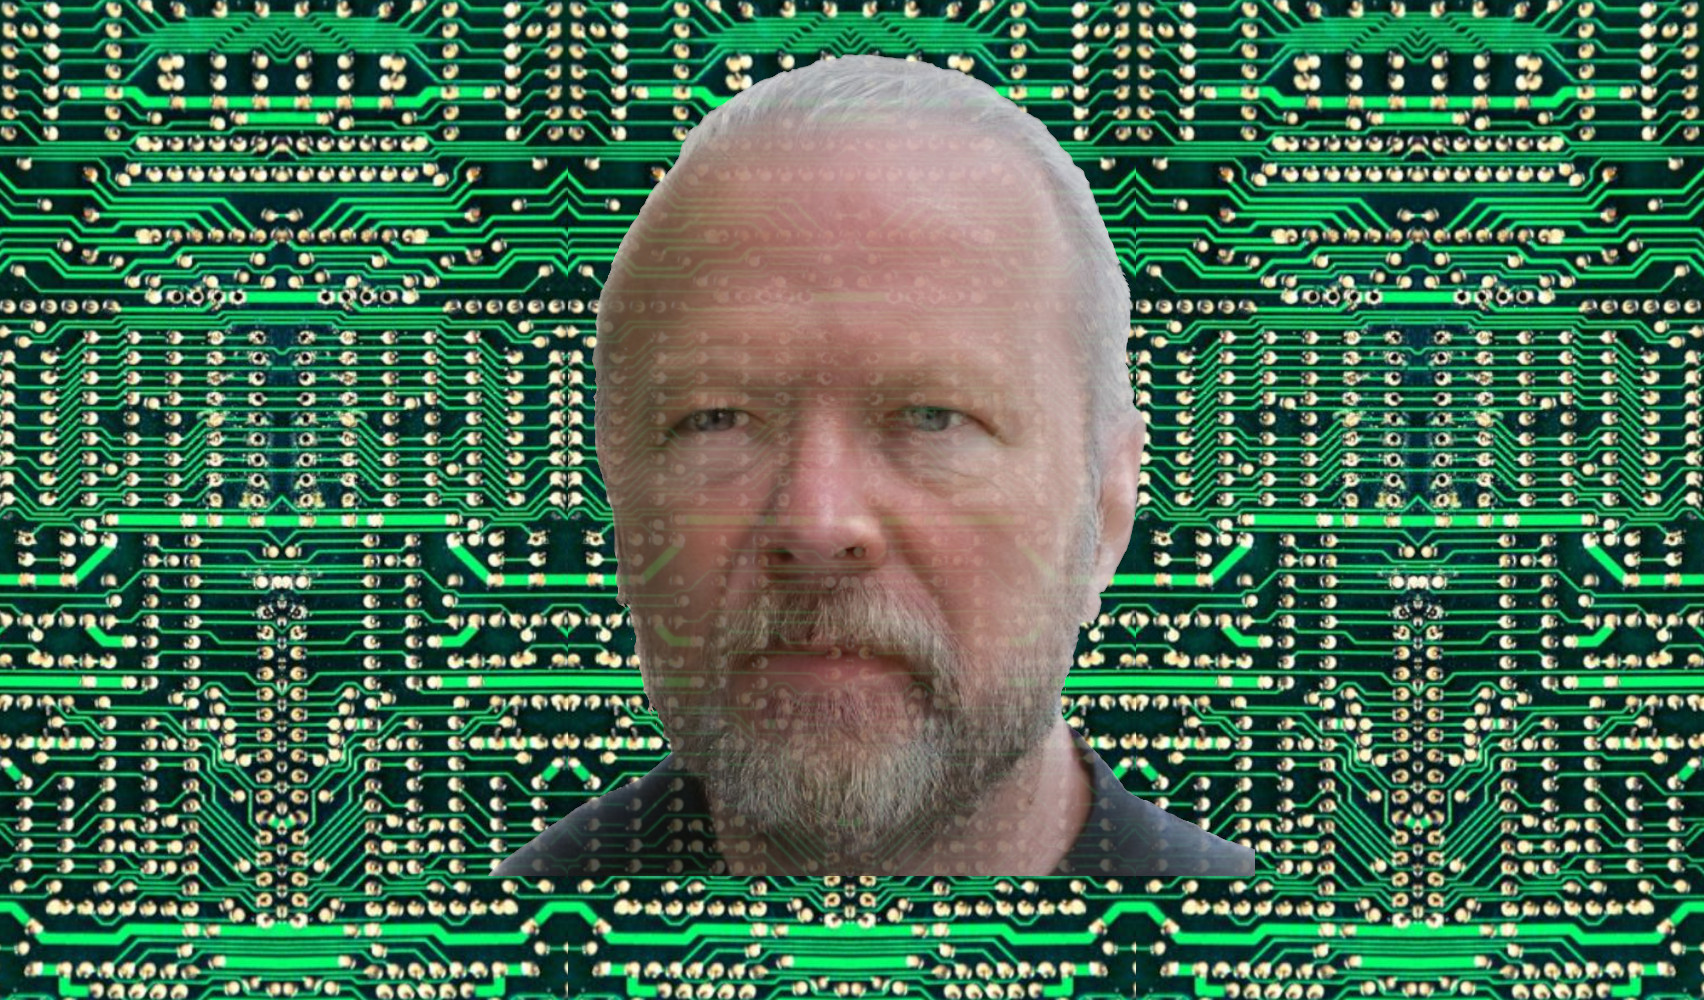 ID Proposed pre-production poster art for PKD - Wheatfield - No Crows project with no text.  A Bitrot Heresay Production.jpg